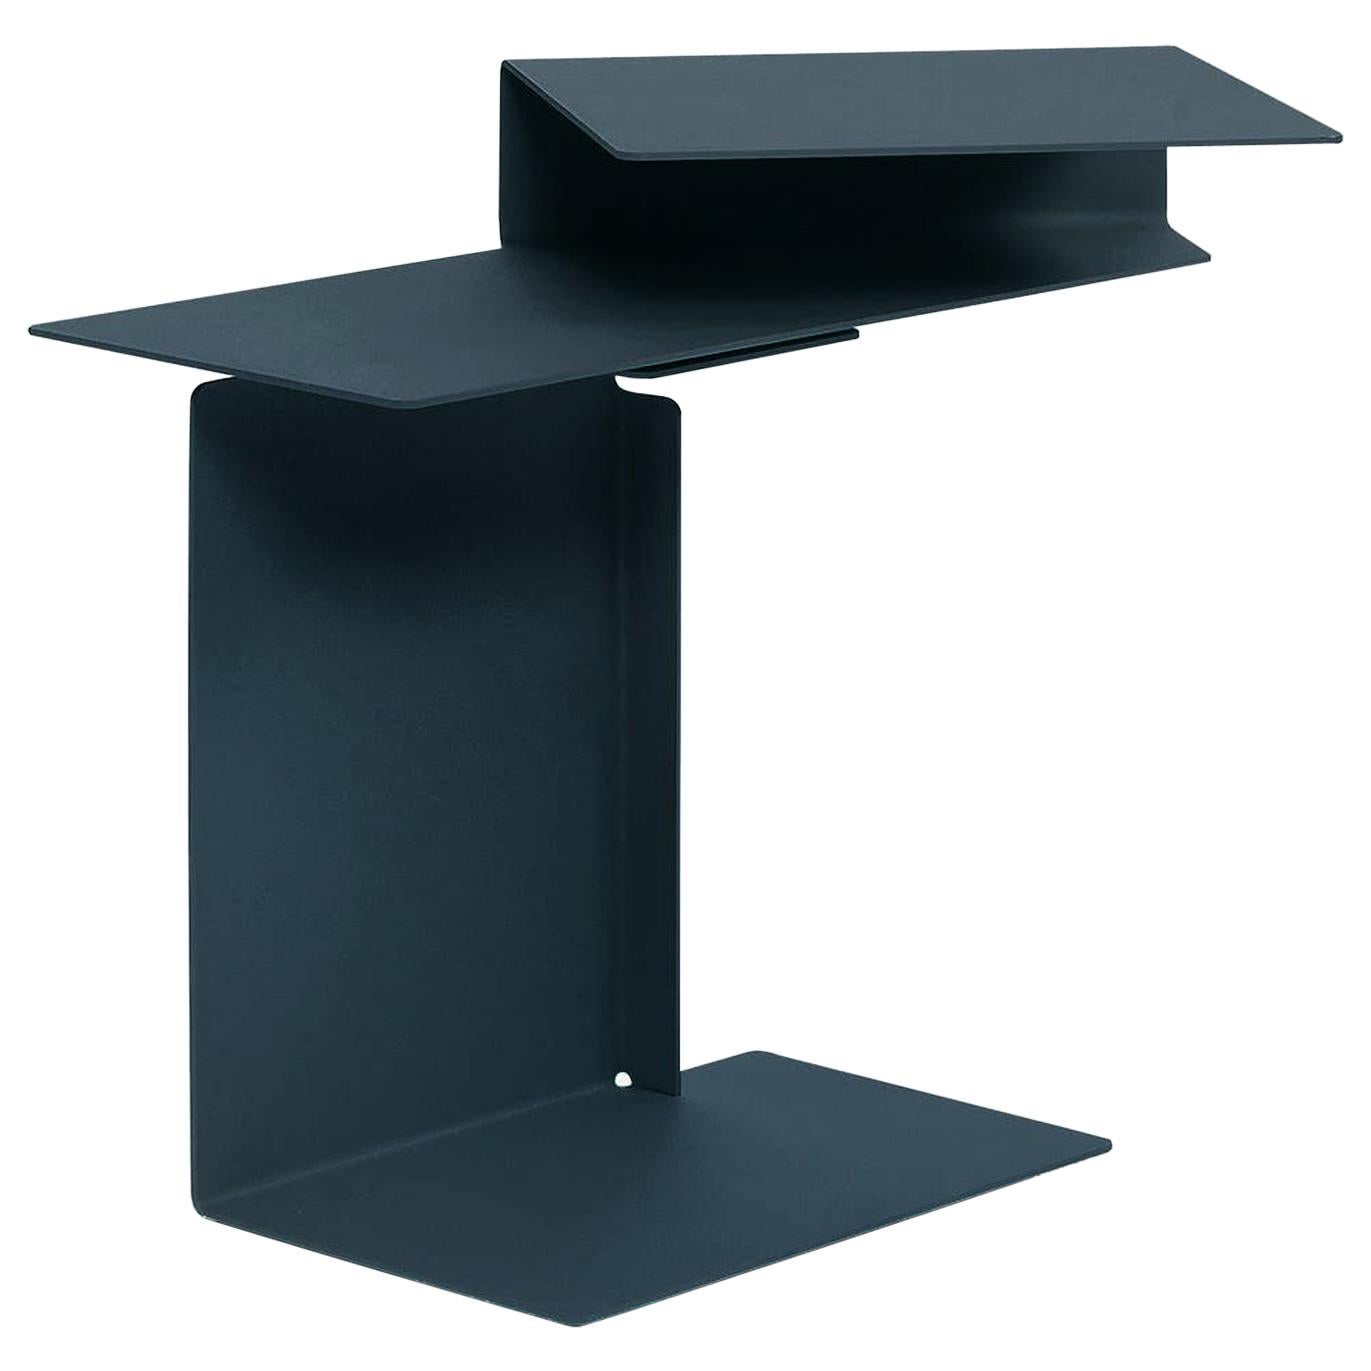 Classicon Black Diana E side Table designed by Konstantin Grcic